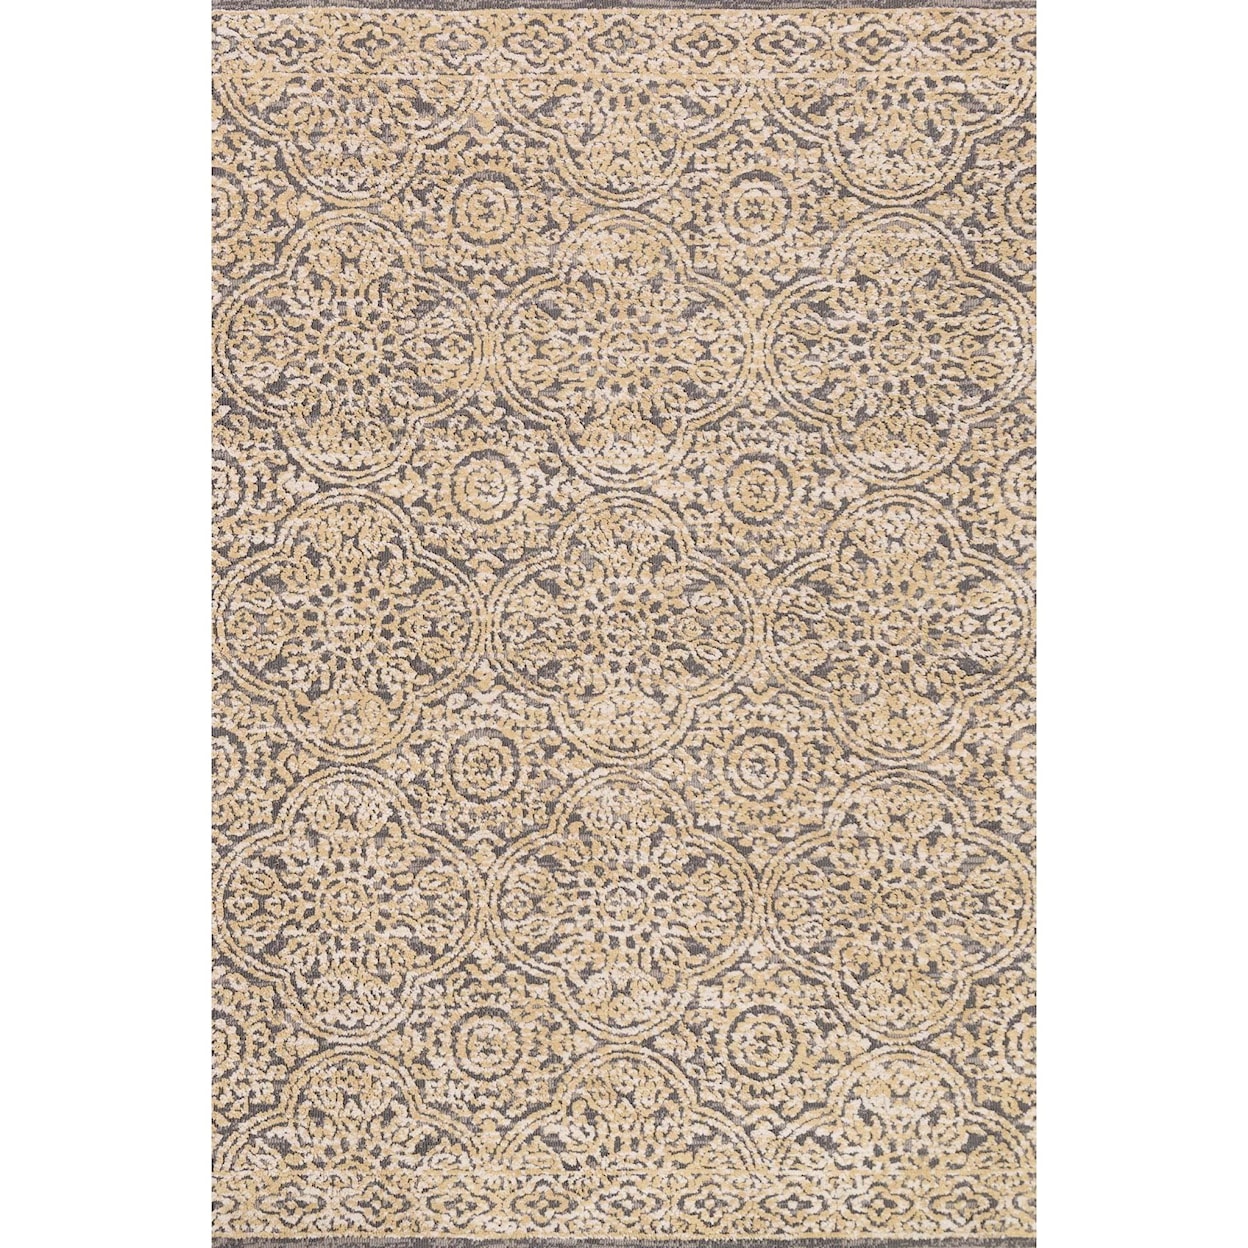 Magnolia Home by Joanna Gaines for Loloi Lotus 7' 9" x 9' 9" Rectangle Rug